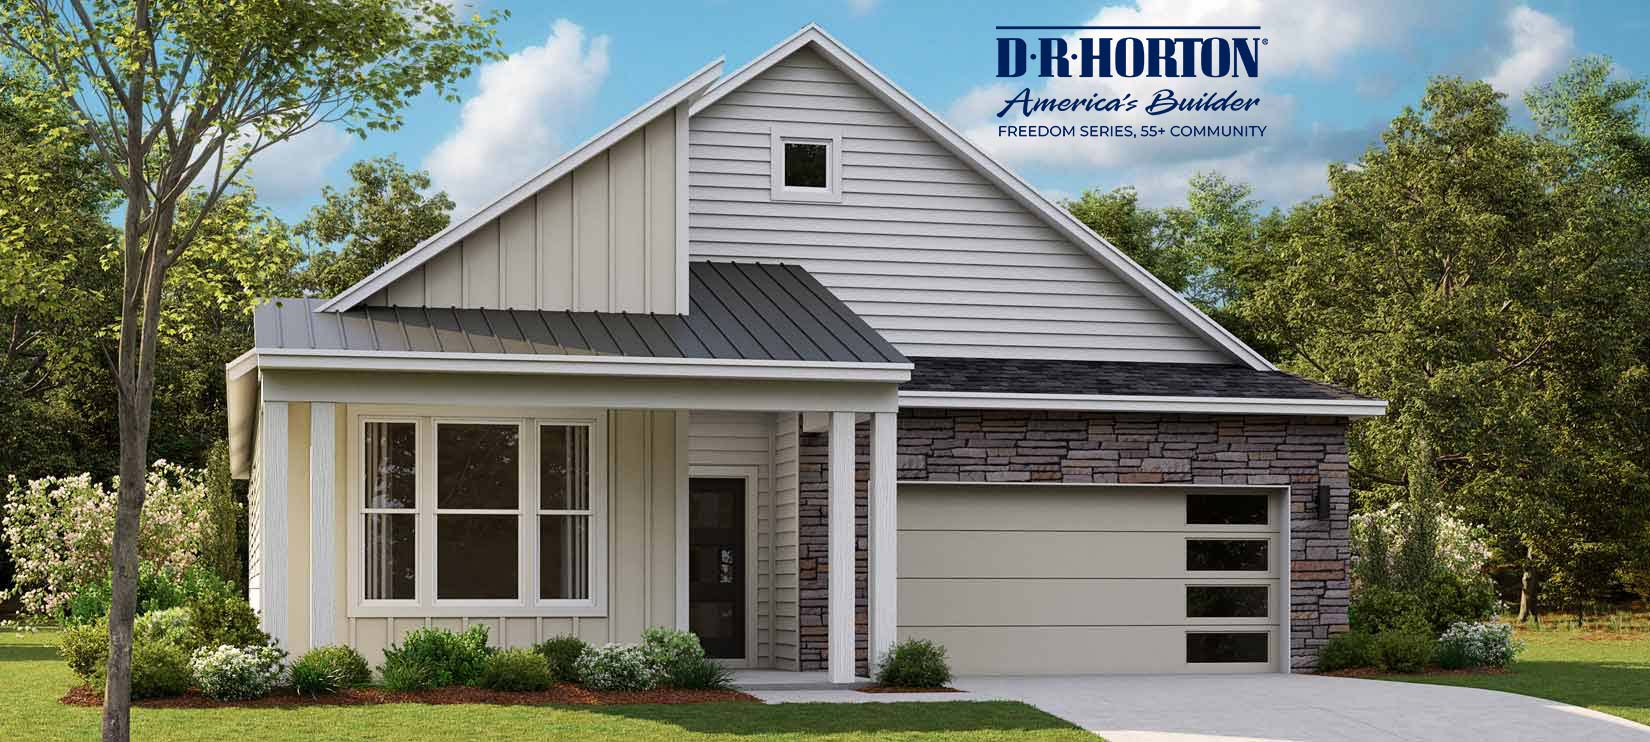 D.R. Horton Freedom 55+ Active Adult Homes Coming to Nexus Master Planned Community Gallatin Tennessee